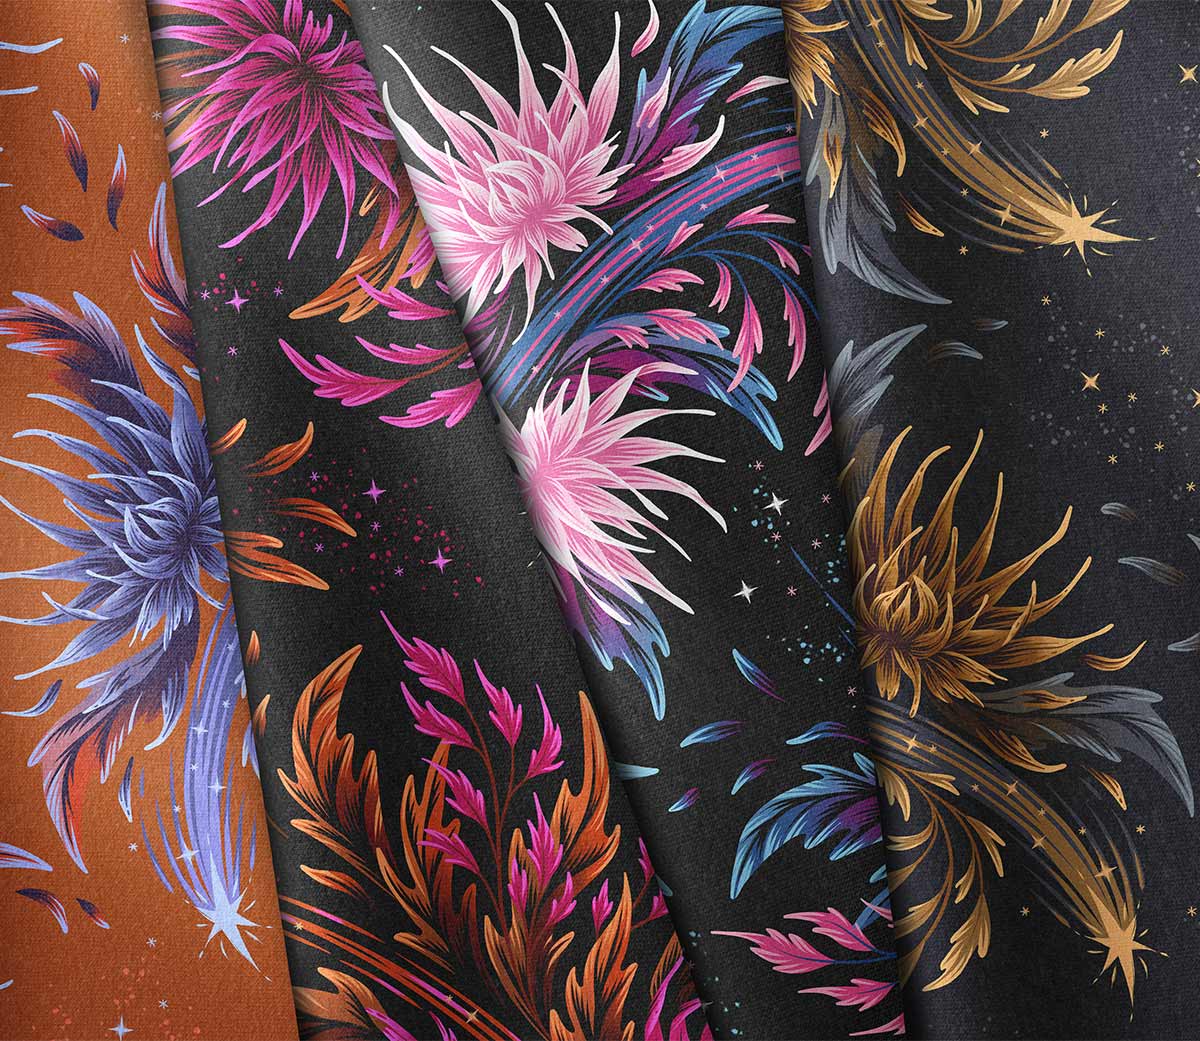 Floral supernova four fabric colorways by Andrea Muller